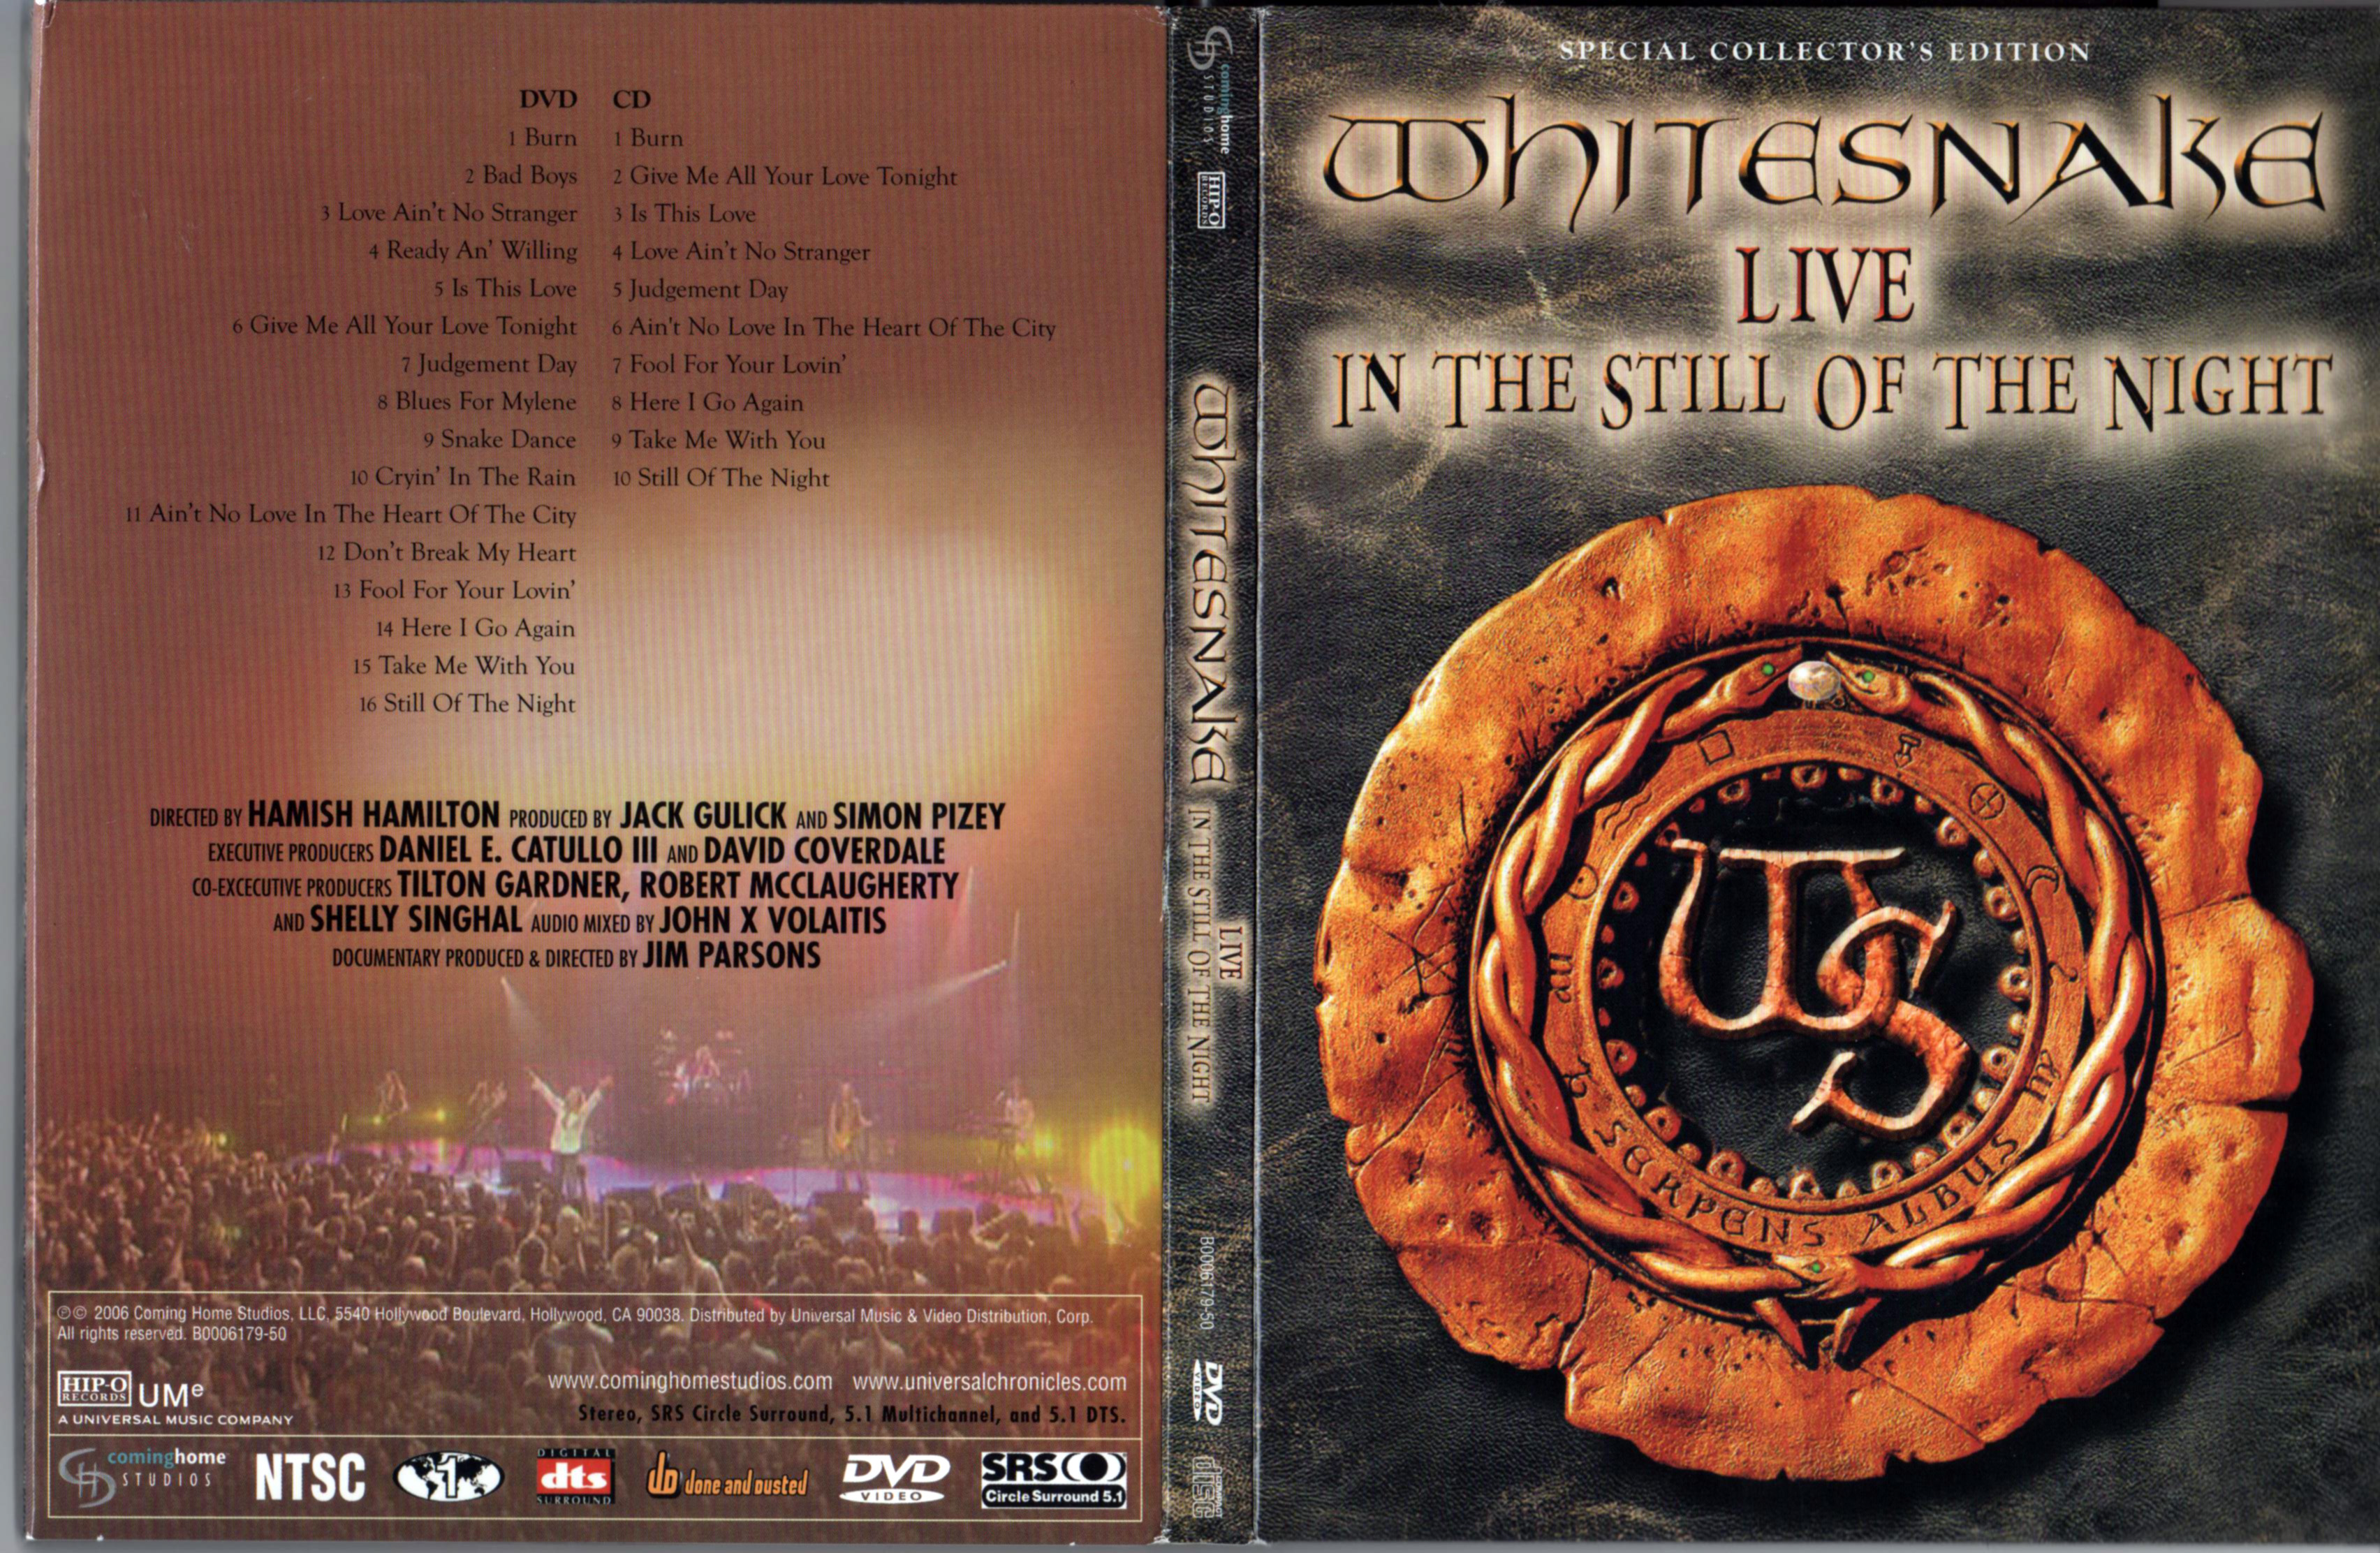 Jaquette DVD Whitesnake - Live in the still of the night